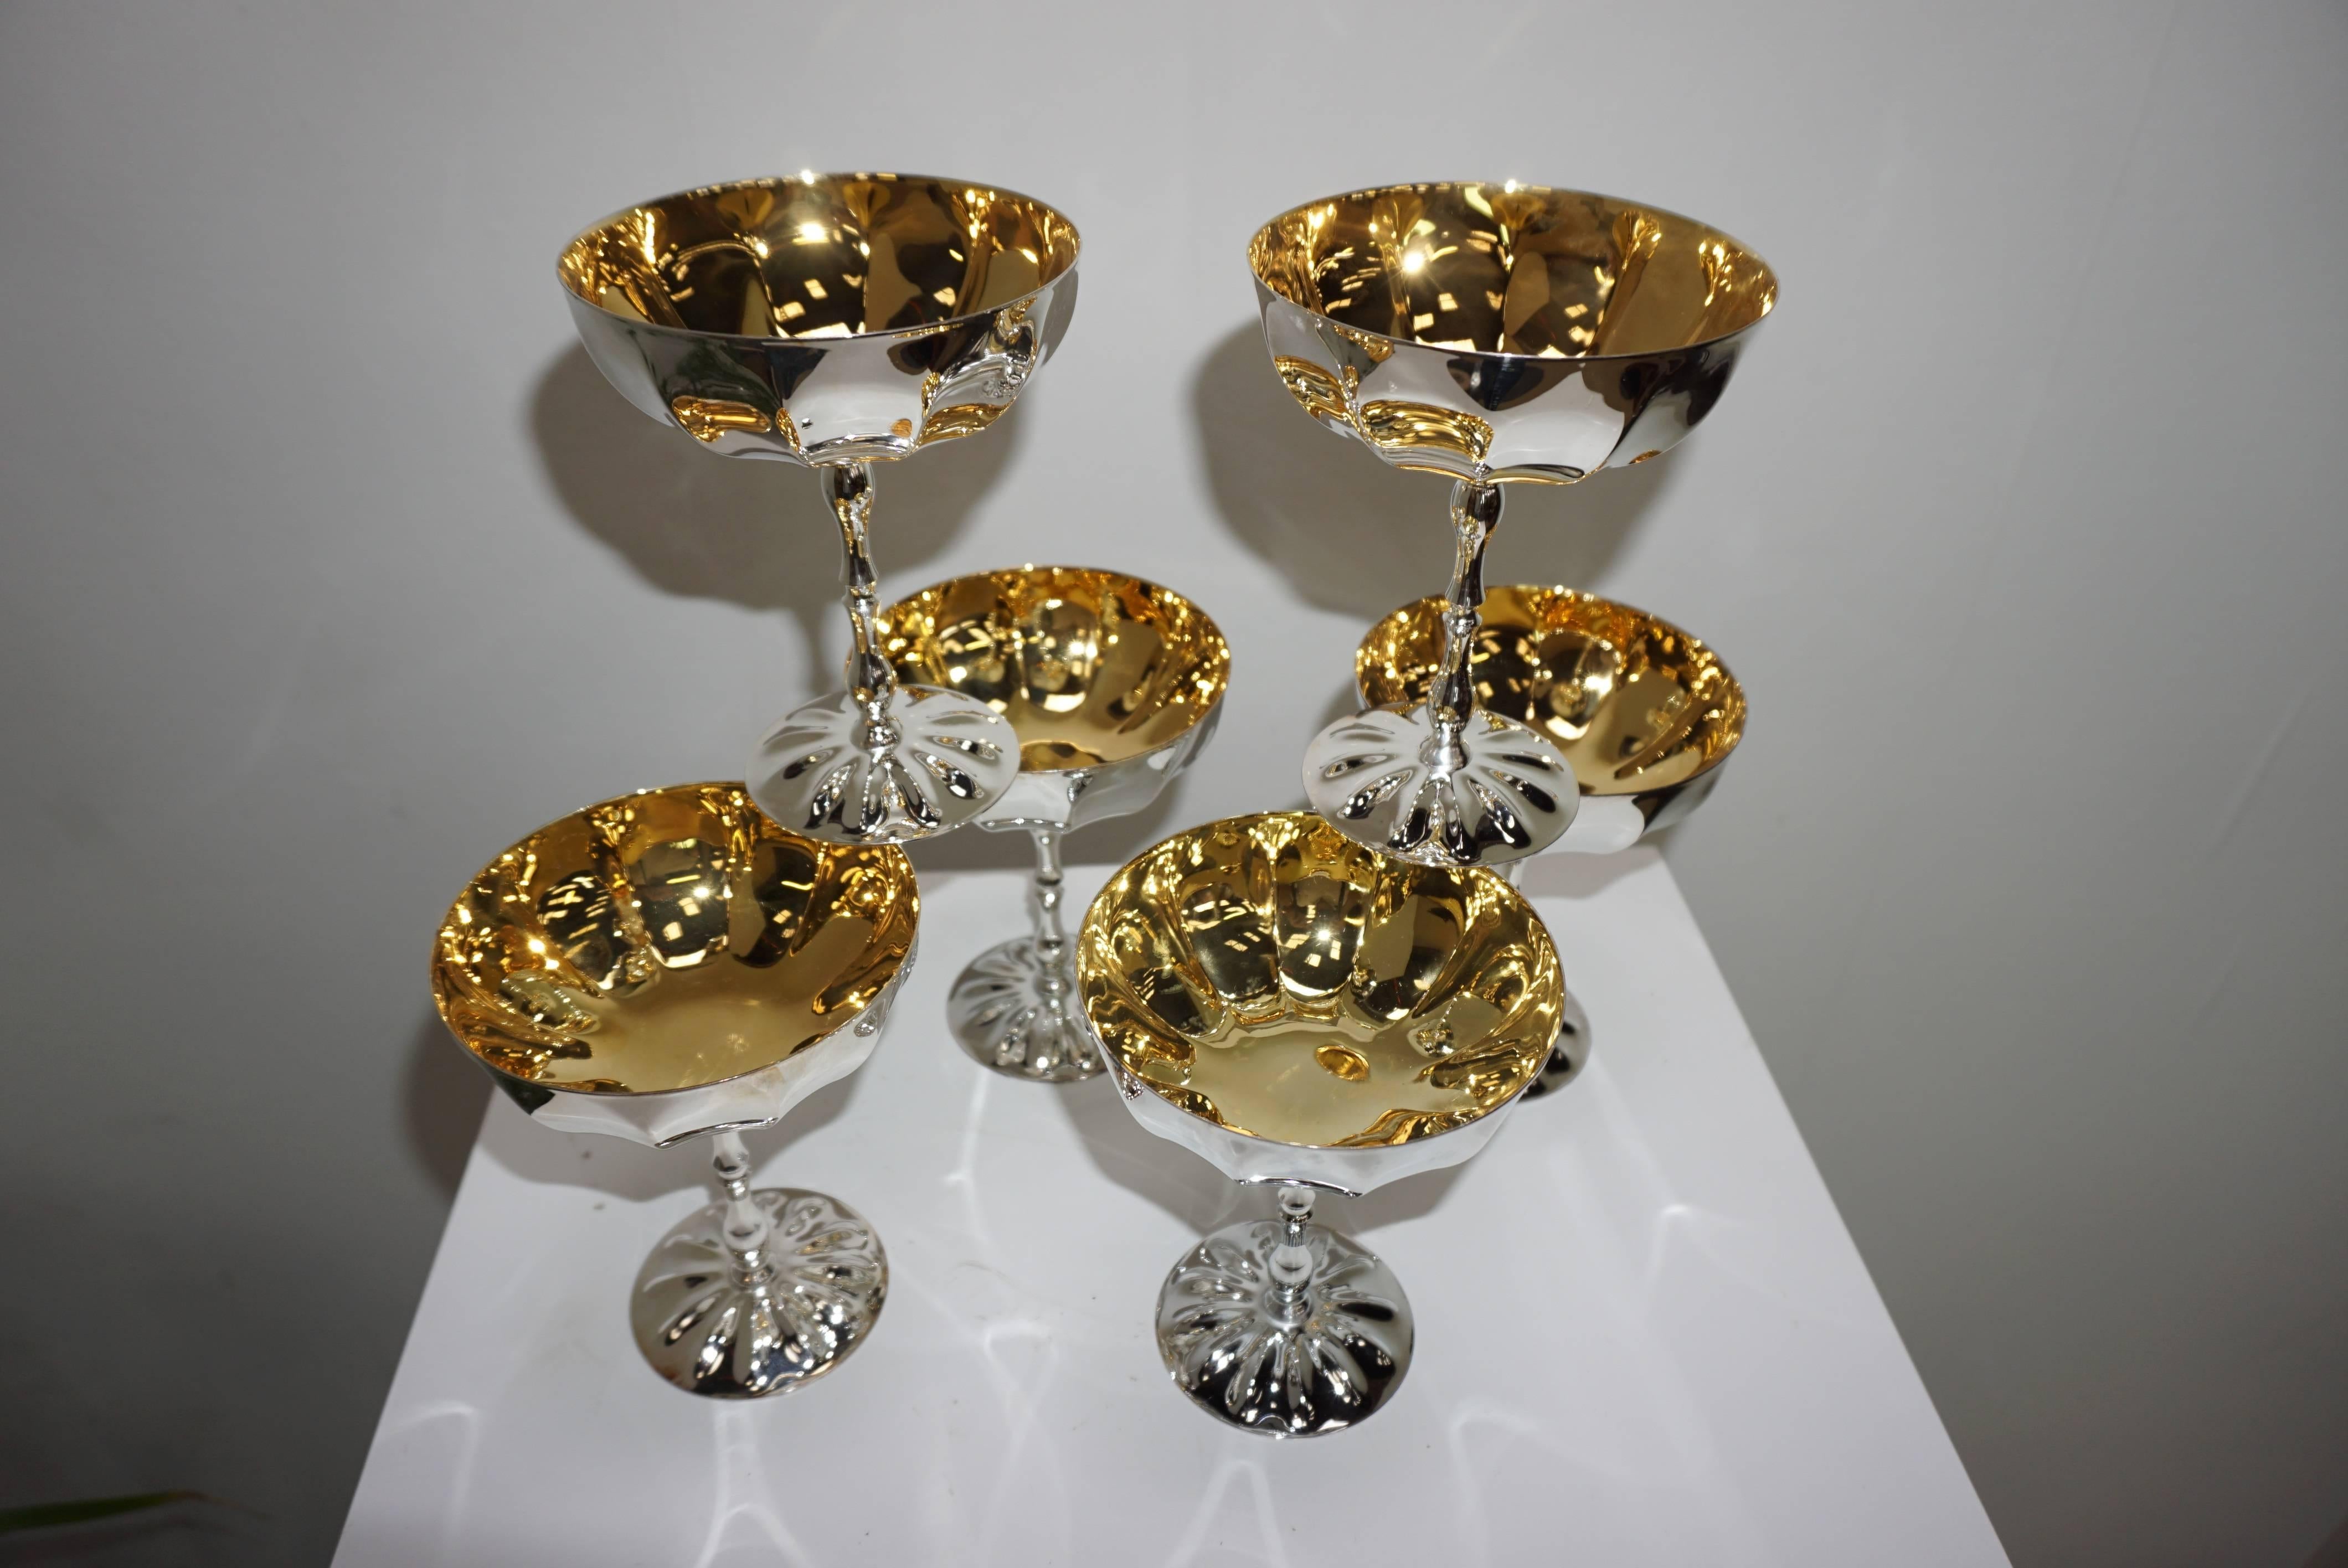 Set of 6, 24-karat gold-plated and silver plated ice cups. From a European palace that we cannot cite, these ice cream dishes have never served. They can be served for wonderful desserts as well as served a vintage champagne.
Several sets